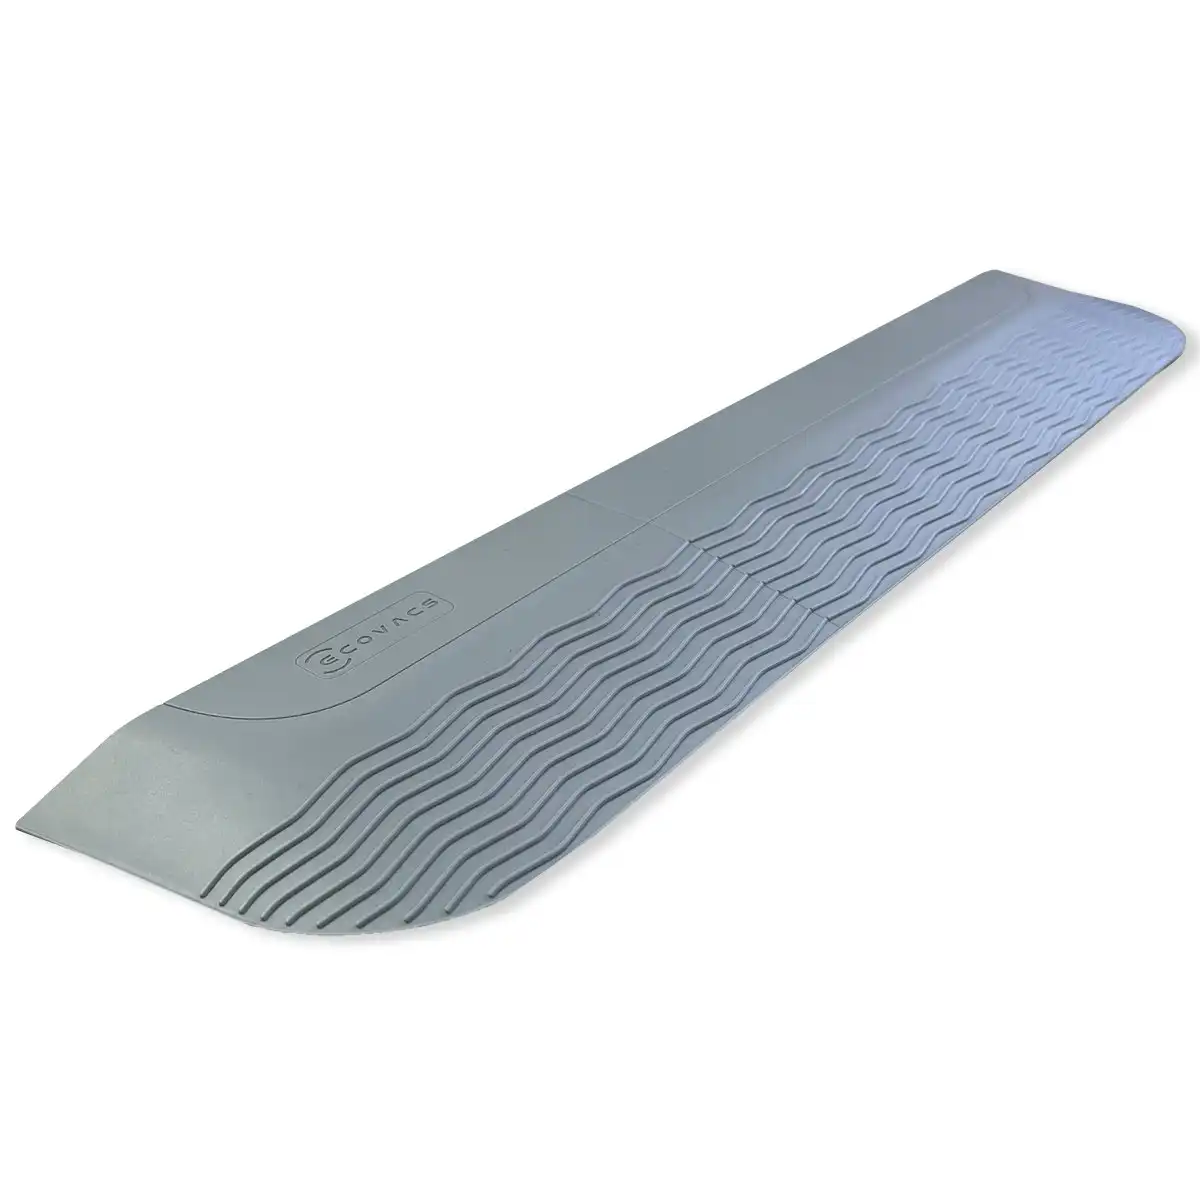 Roborock Ecovacs Branded Ramp - 1cm Clearance Suitable For All Robotic Vacuum Cleaners